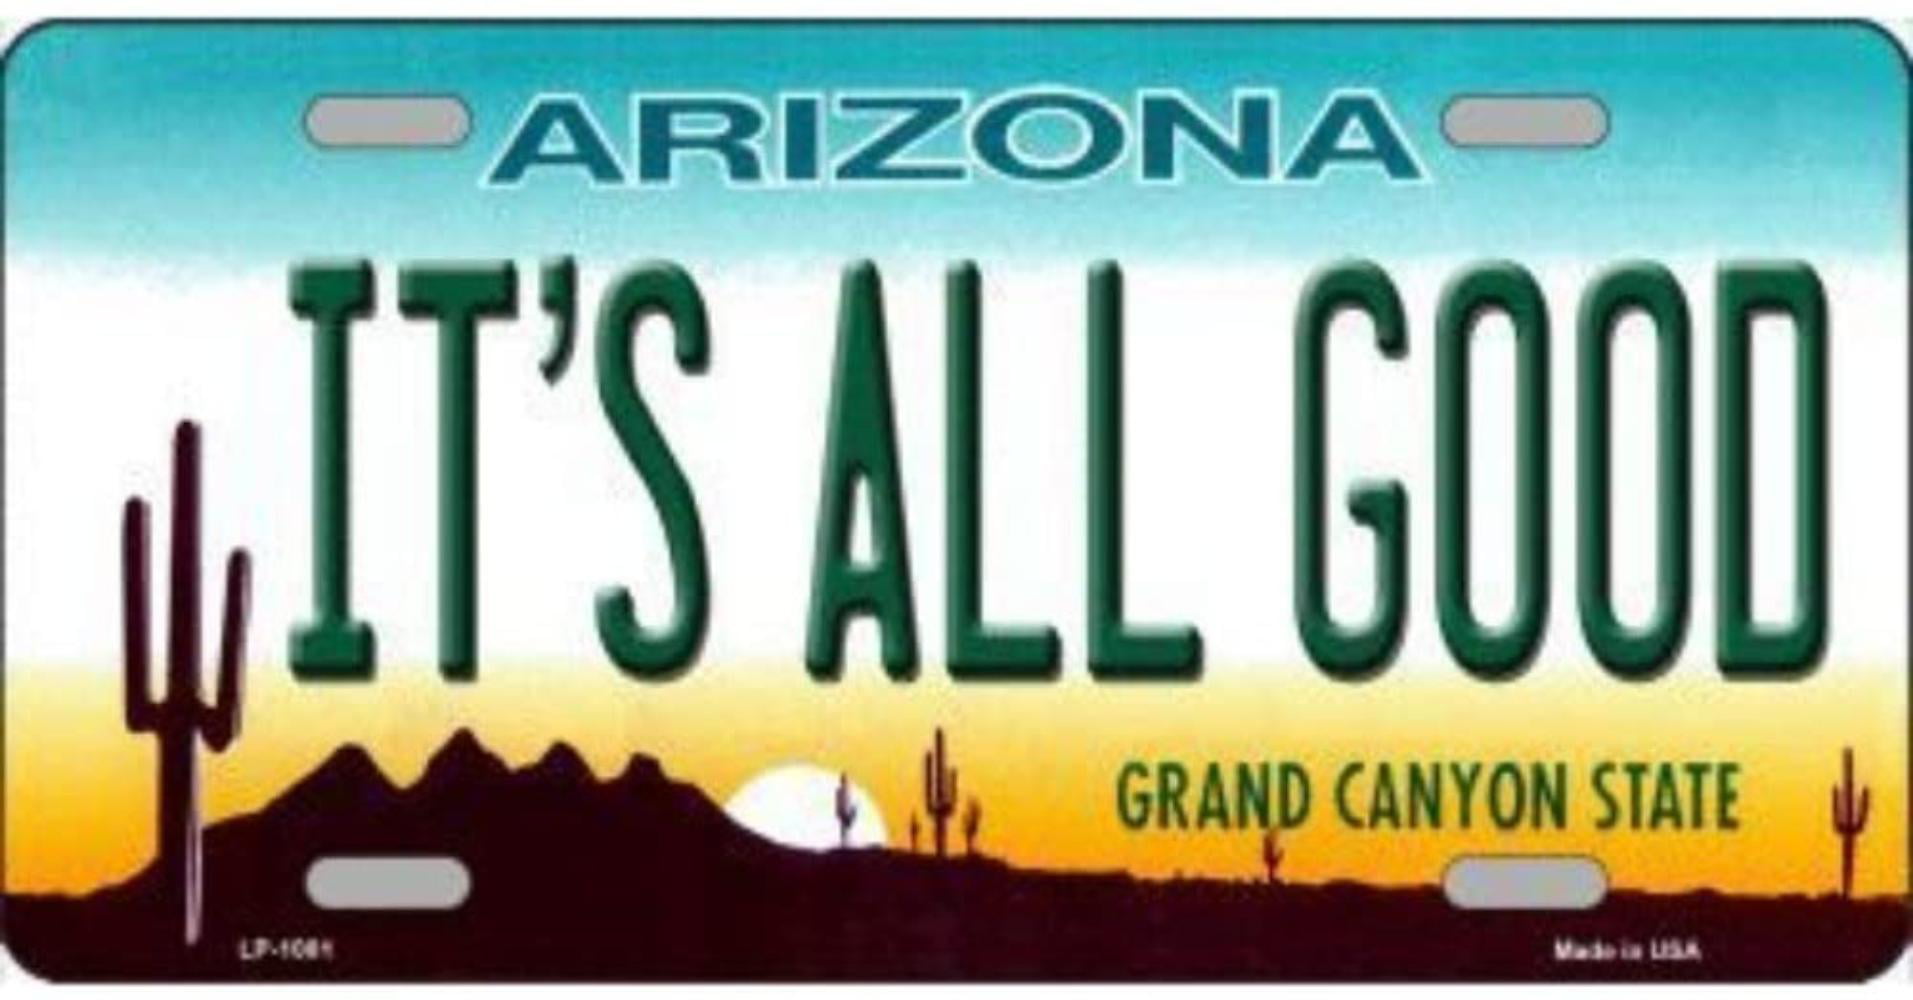 Personalized Arizona License Plates 6x12 for Front of Car Customized Aluminum Metal Novelty Car Tag with Text 50 State Custom License Plate 